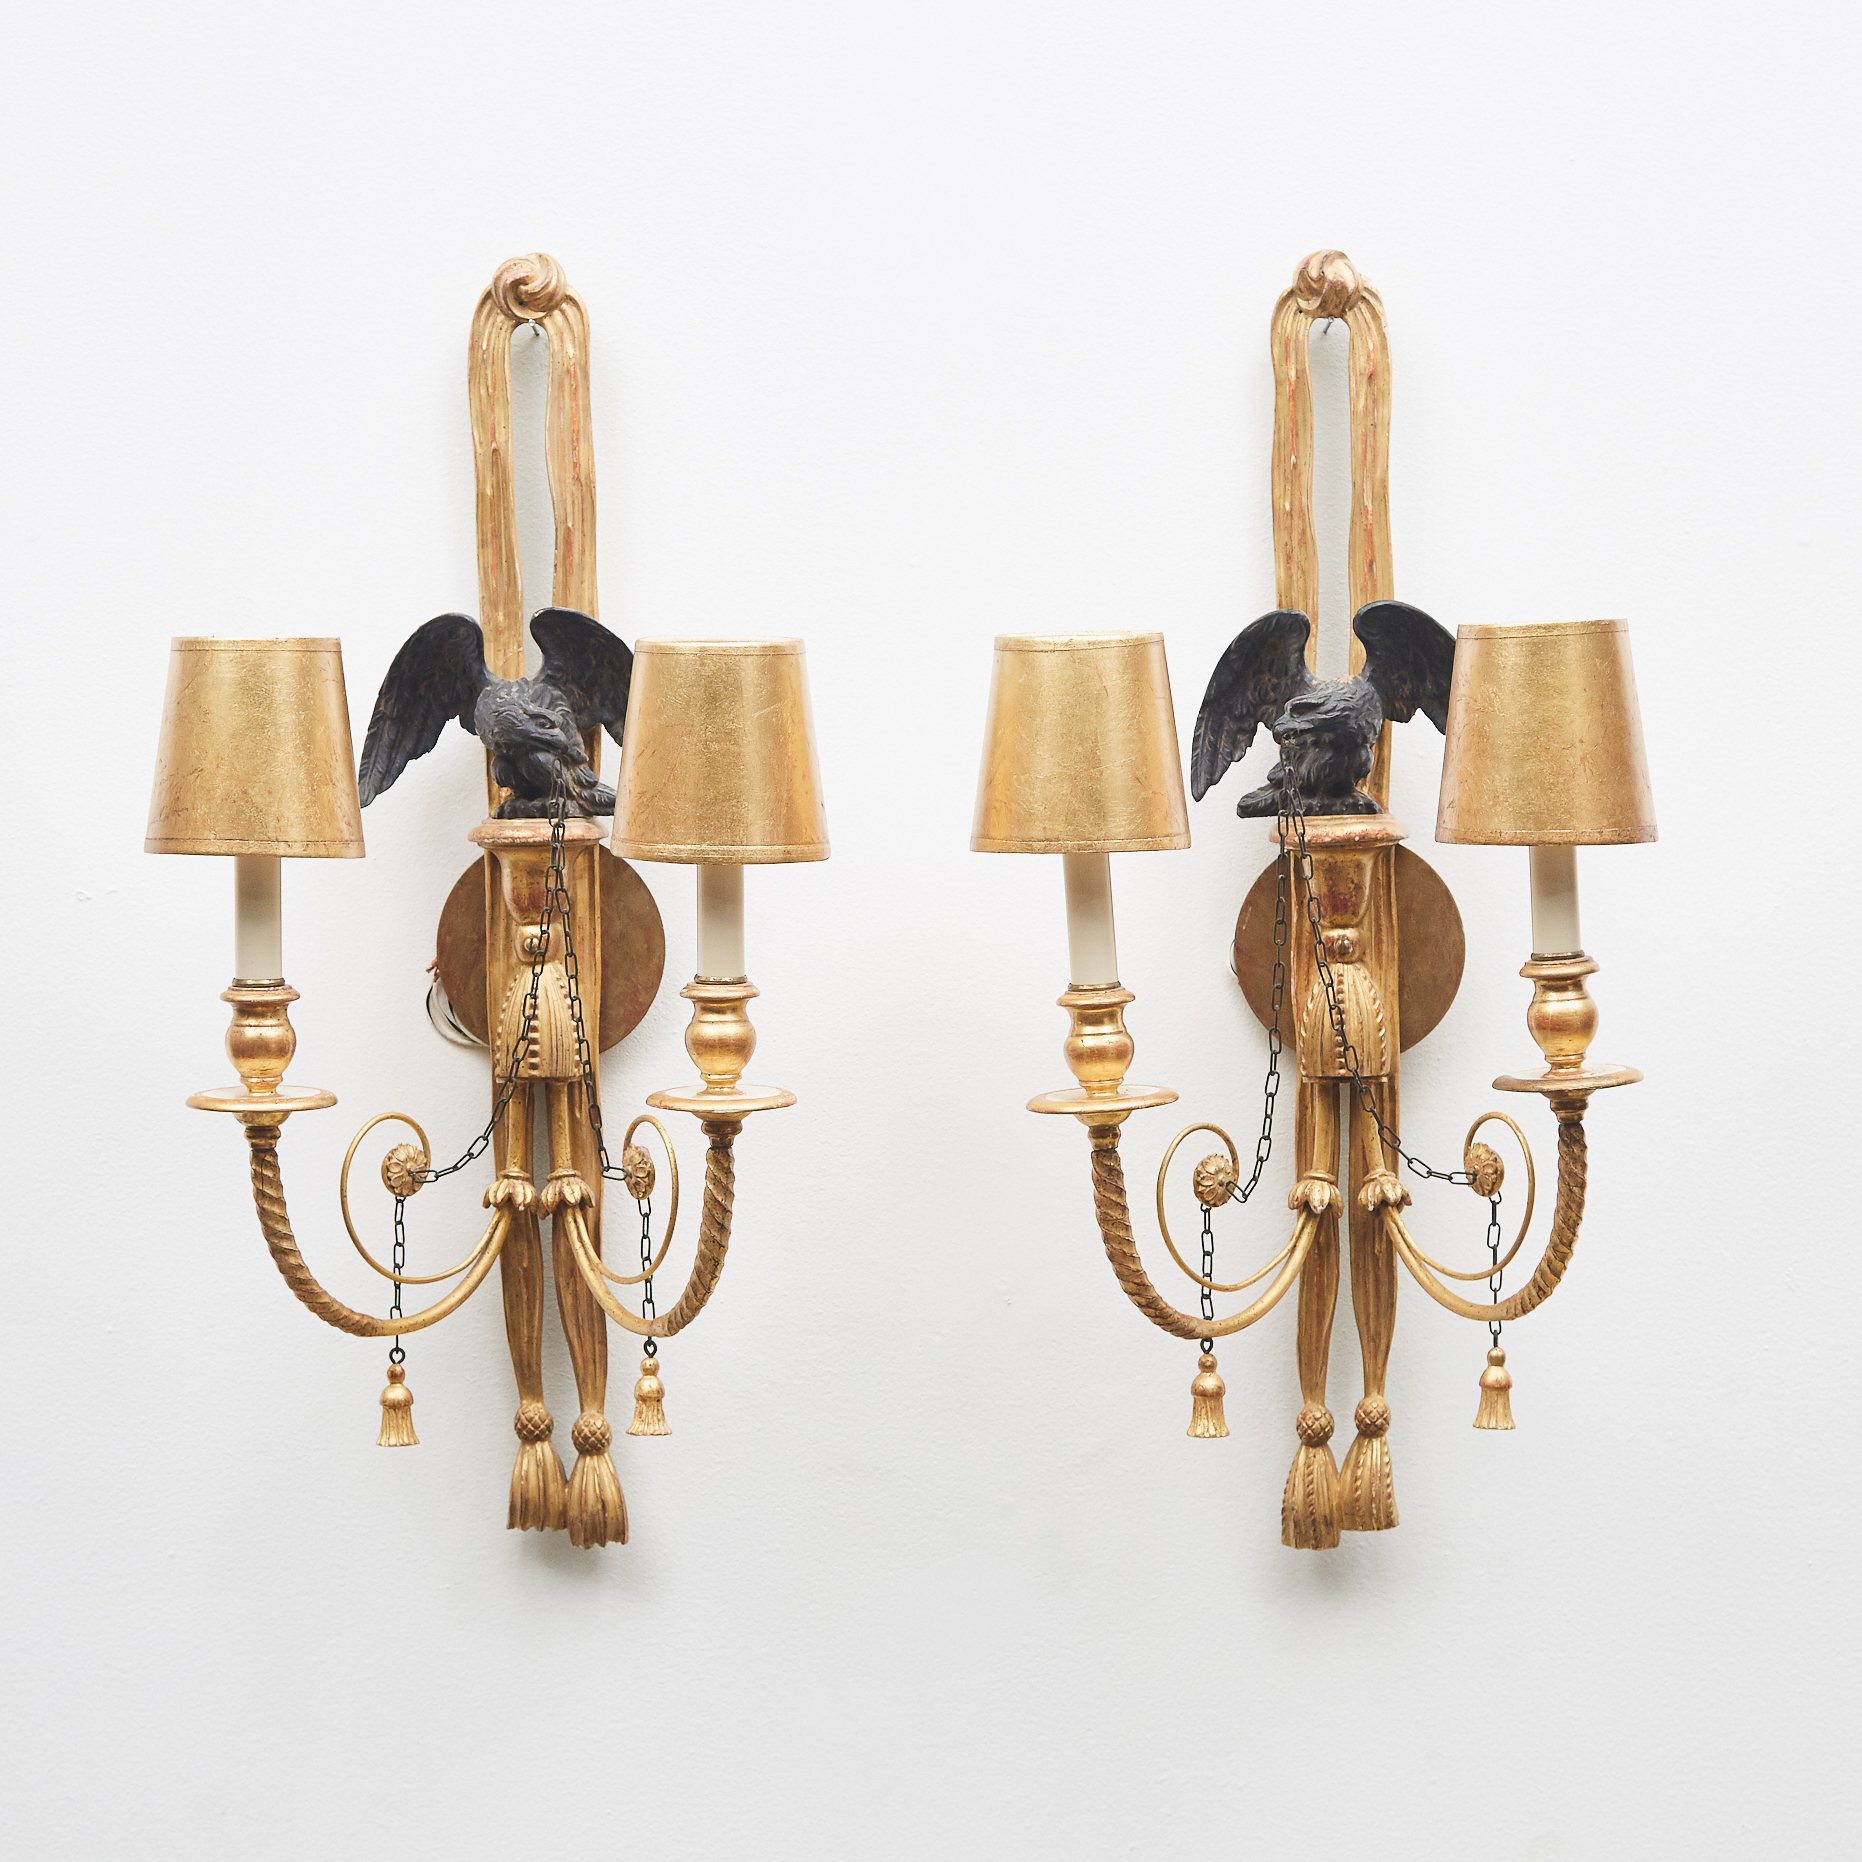 Pair of Federal Style Gilt and Ebonized Wood Wall Sconces, 20th century